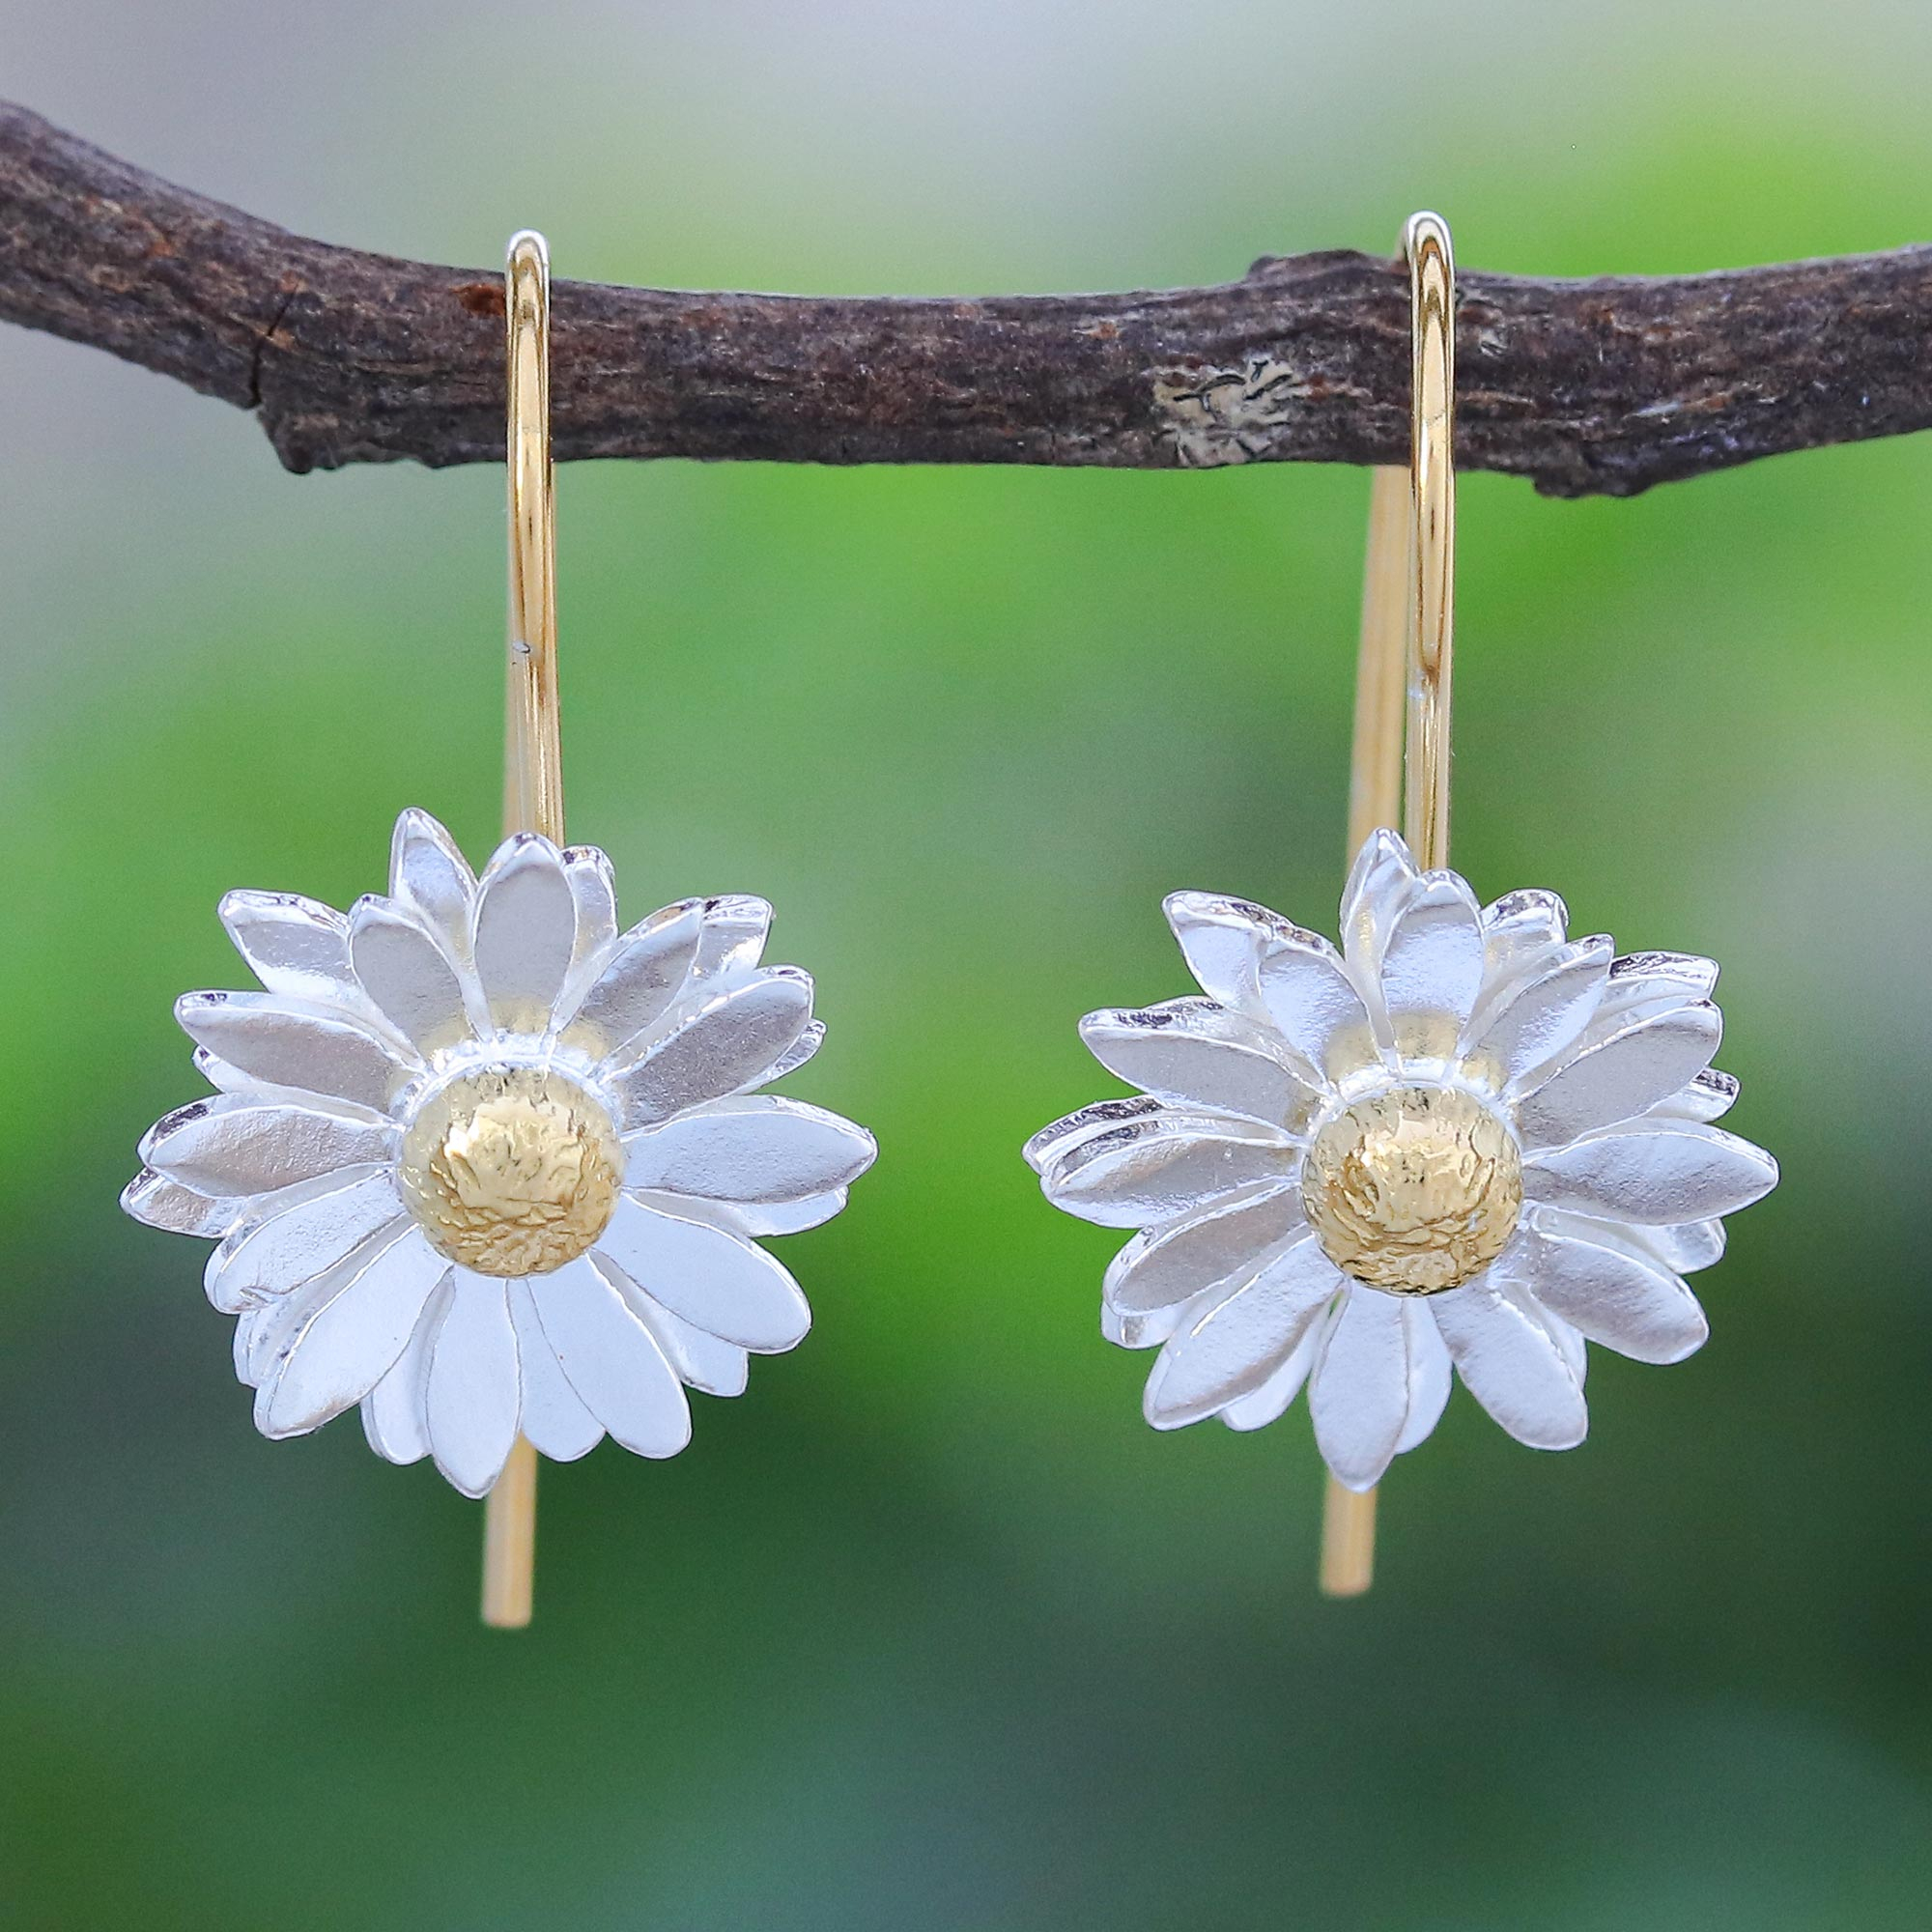 White Daisies Drop / Dangle Earrings Silver Plated Daisy Flowers 